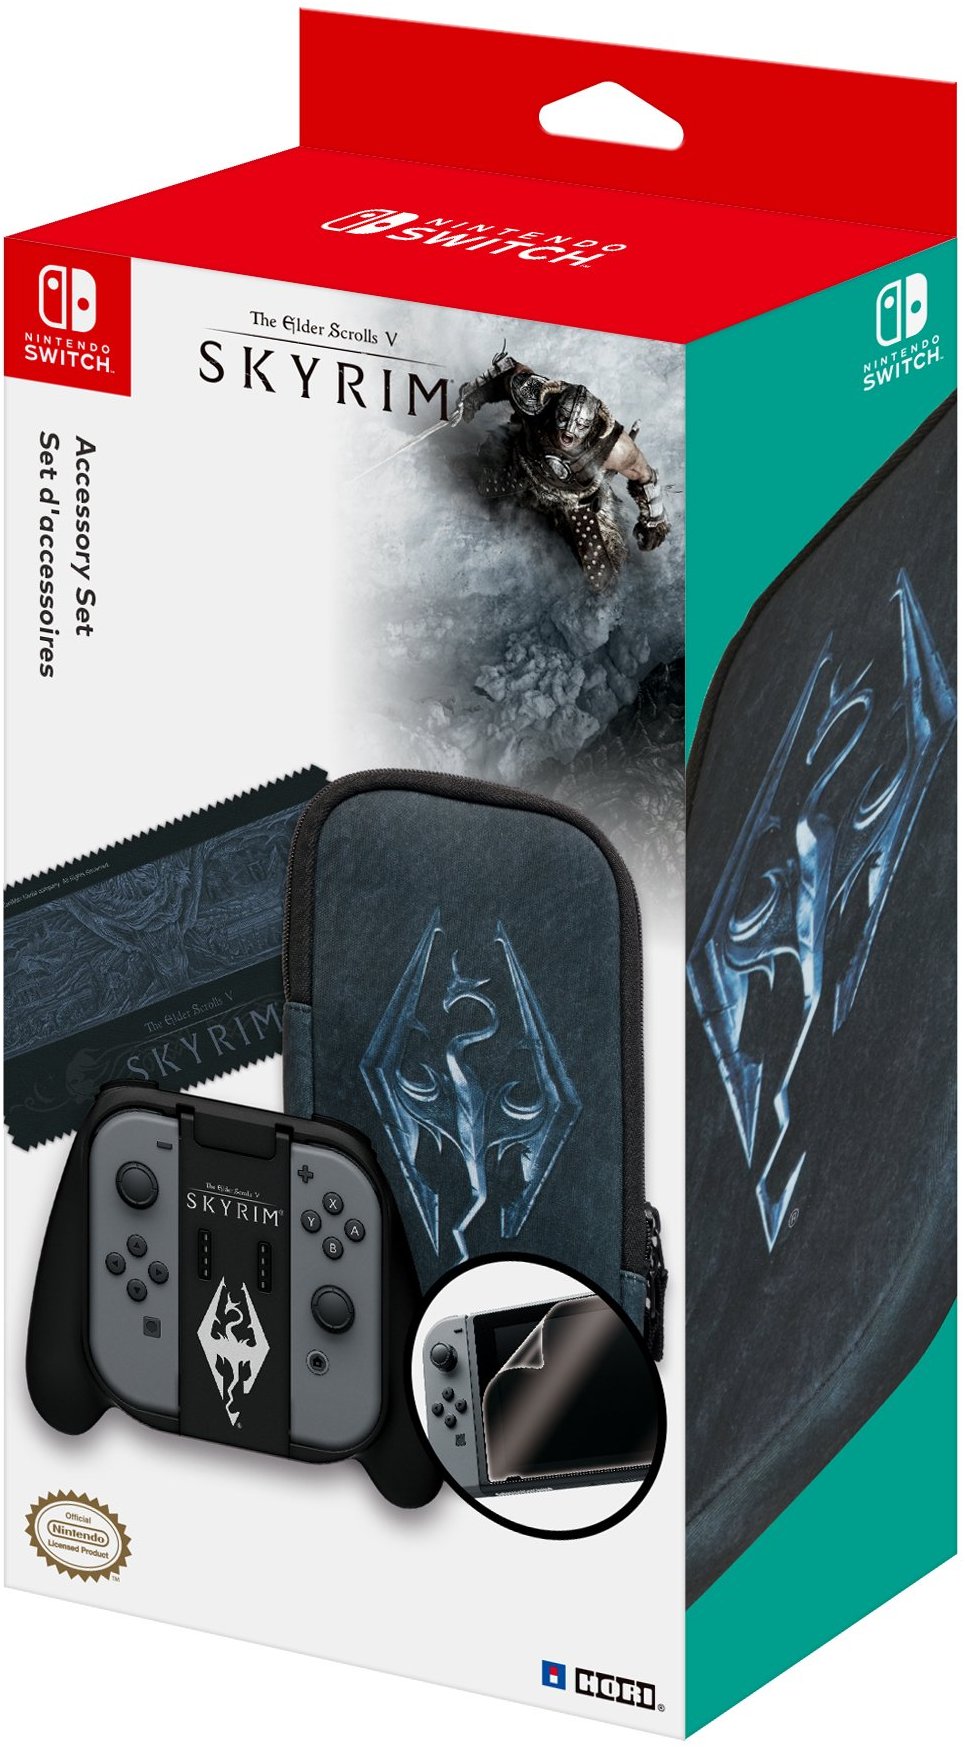 Elder Scrolls Skyrim Limited Accessory Set on the way for